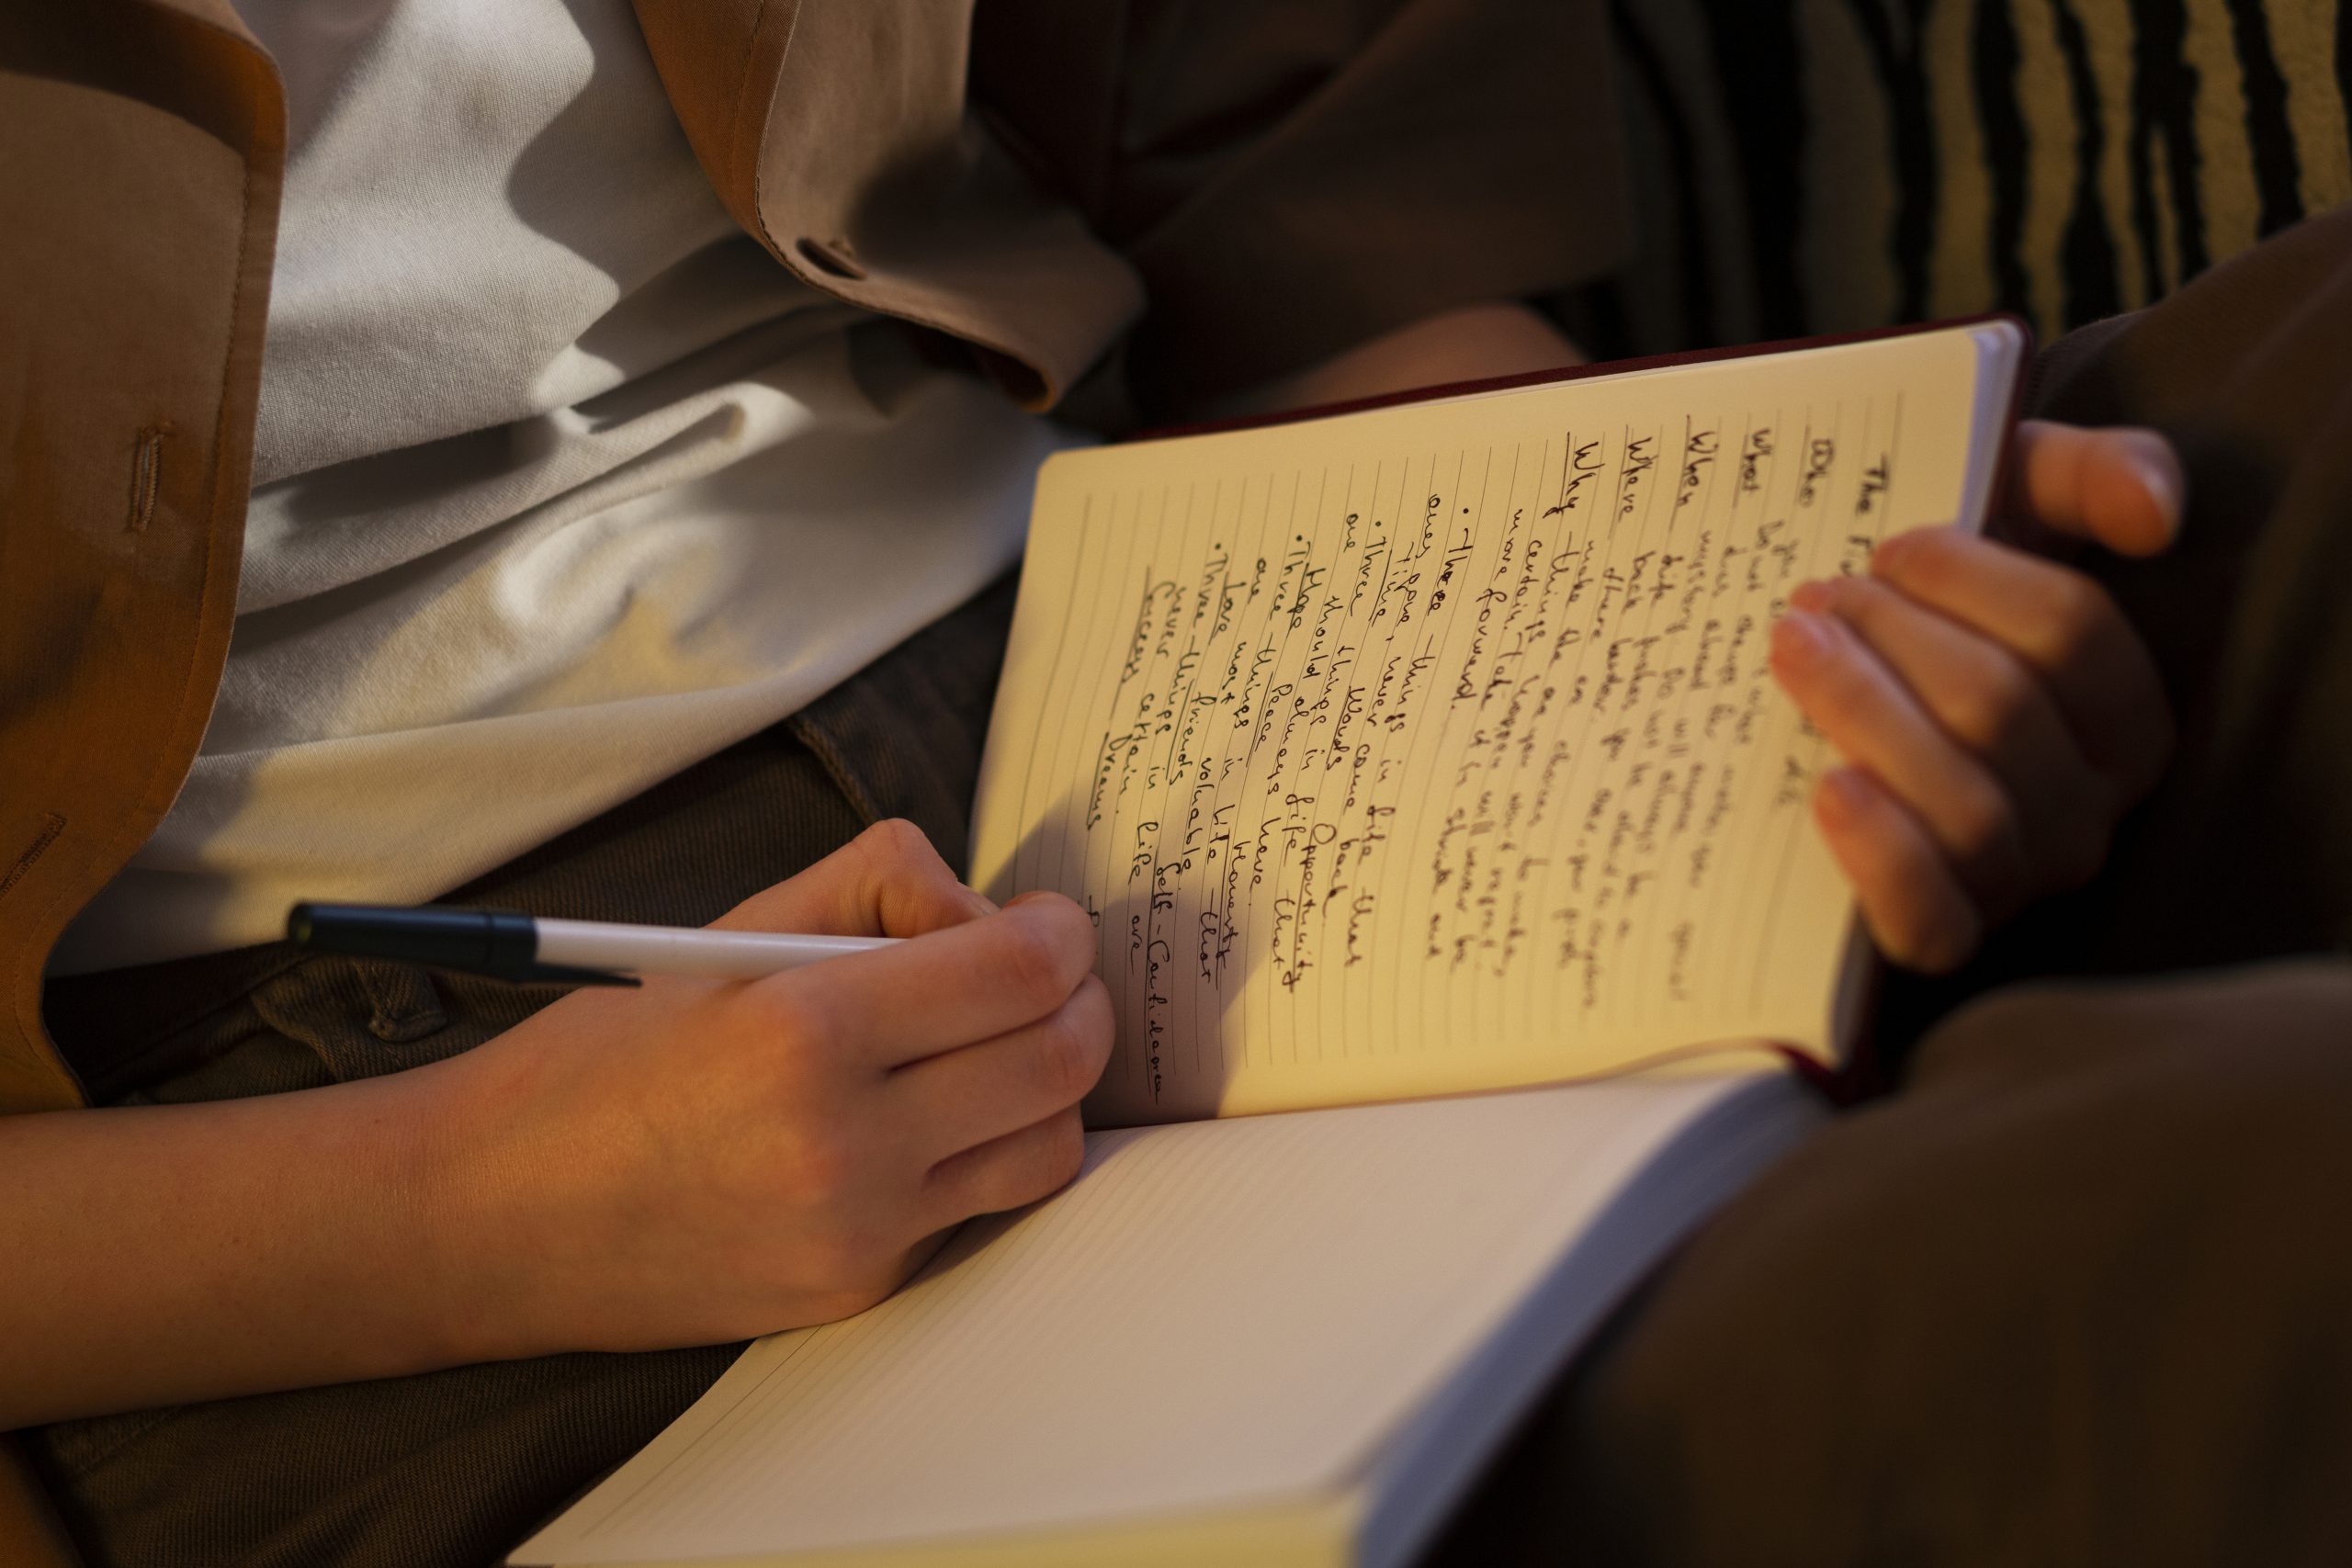 A person sitting and journaling with a pen and notebook. The person is reflecting on their needs for improving relationships.